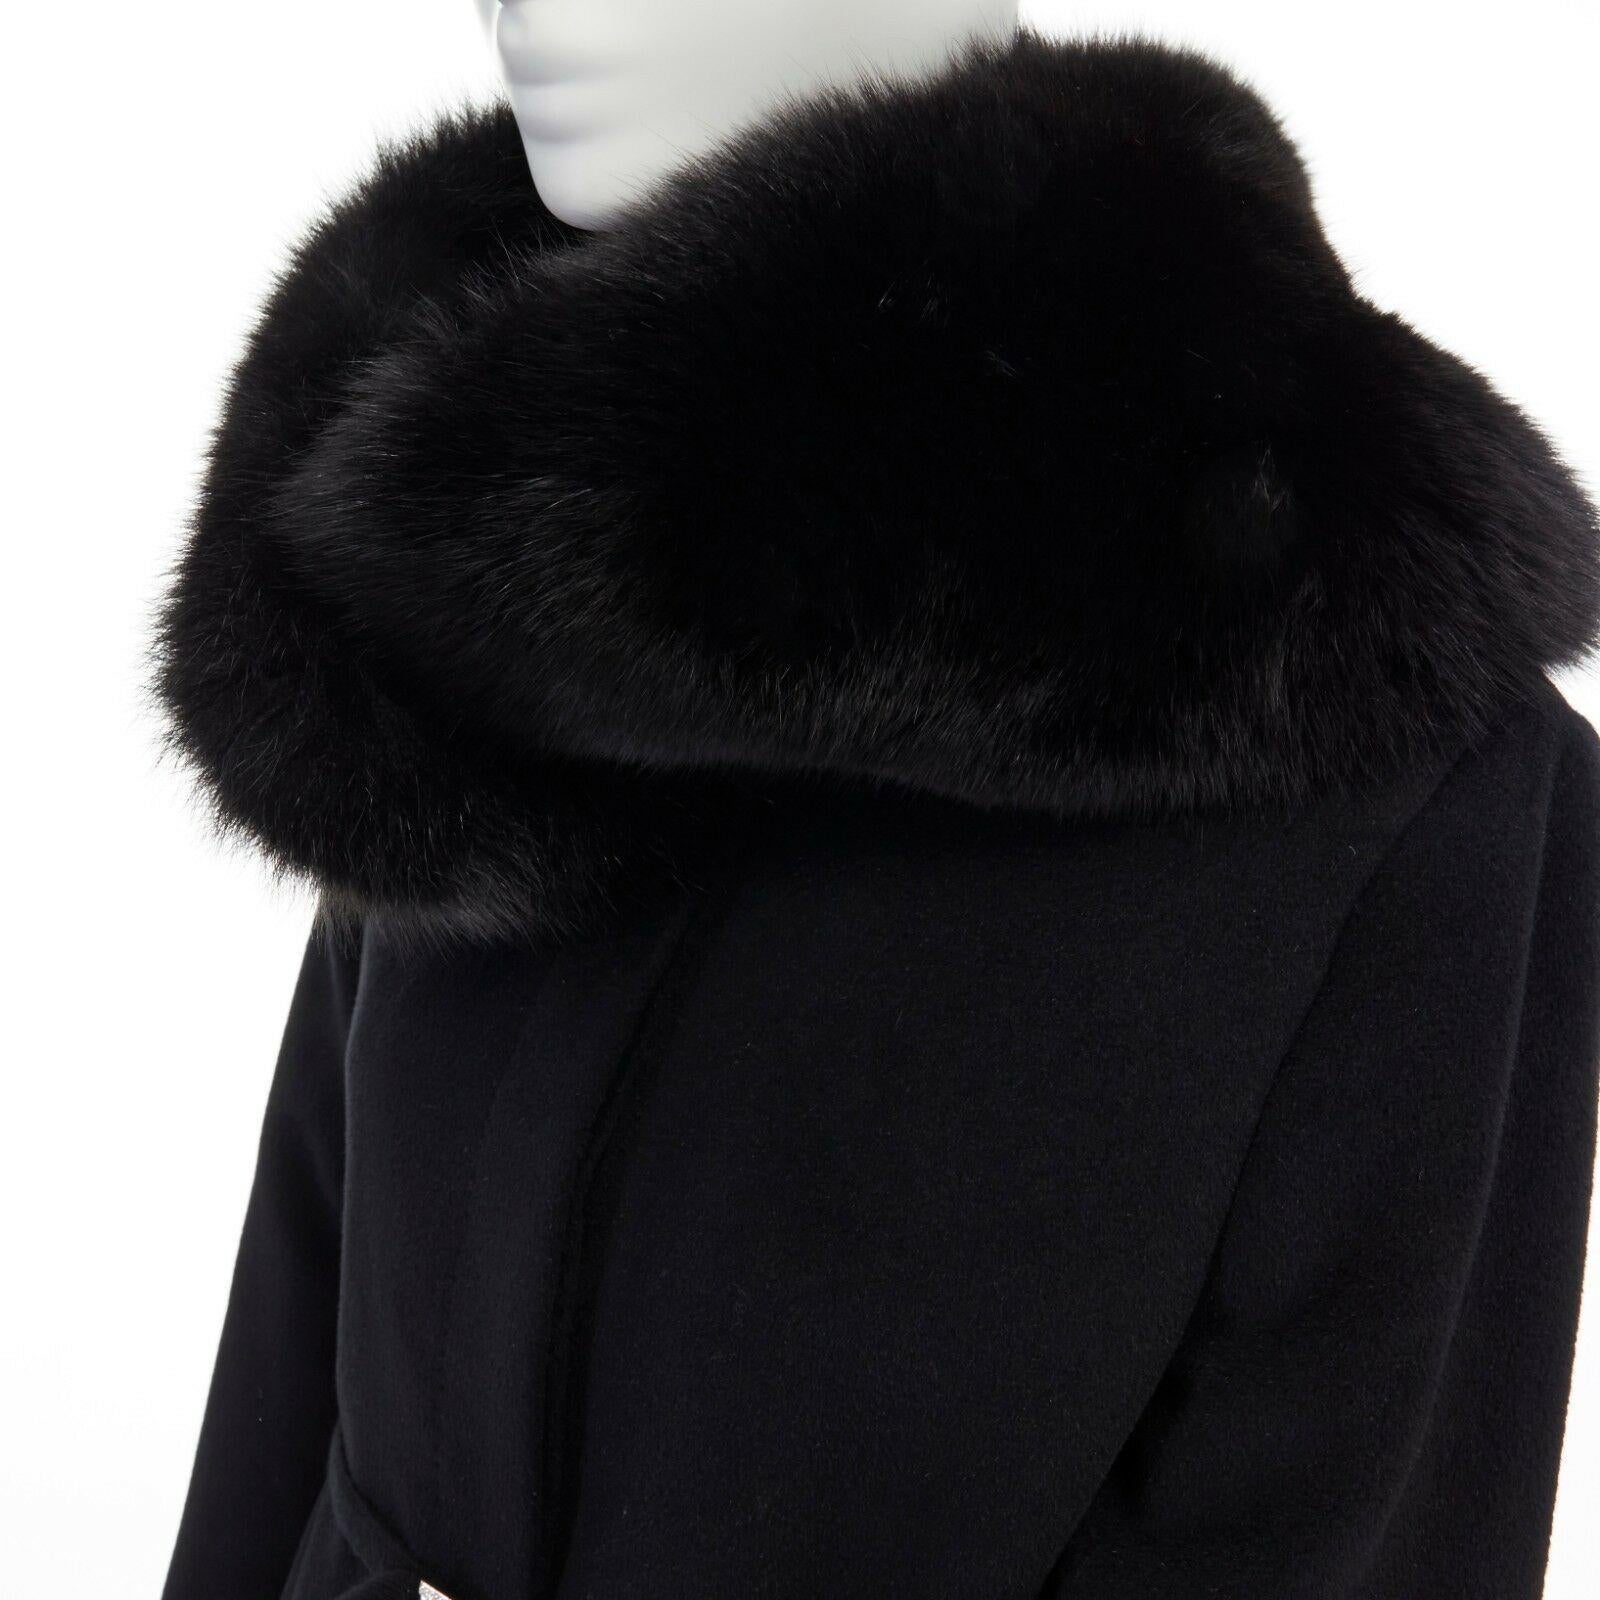 GIANNI VERSACE 1998 black angora wool cashmere oversized fur collar coat IT42 M
GIANNI VERSACE
FROM THE FALL WINTER 1998 COLLECTION
Angora, wool, cashgora blend. 
Black. 
Oversized fur collar. 
Lightly padded shoulder. 
Long sleeves. 
Concealed